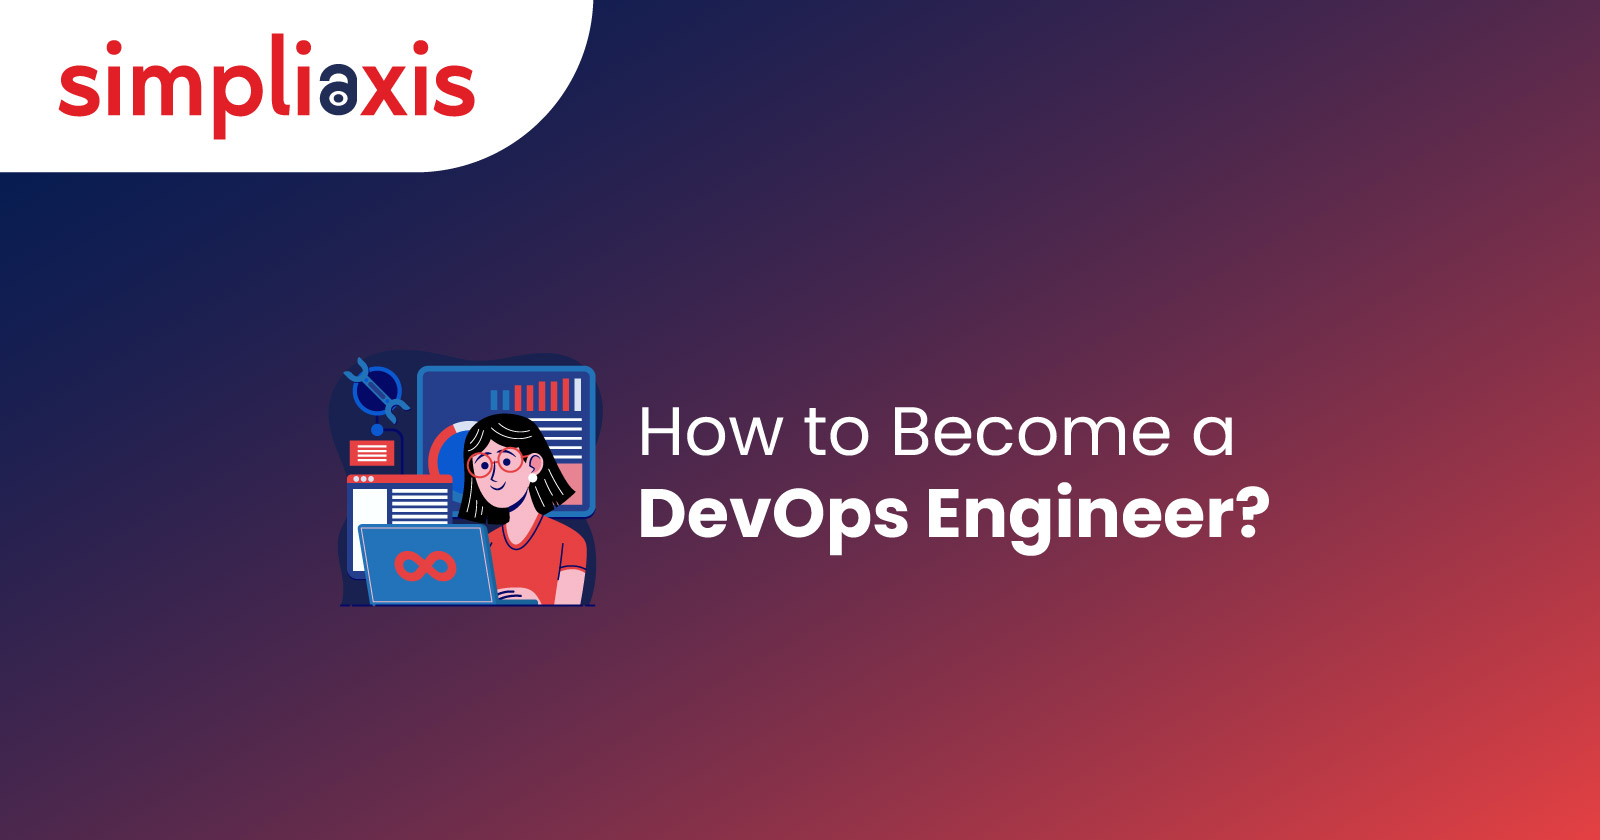 How To Become a DevOps Engineer - Steps to become a DevOps Engineer